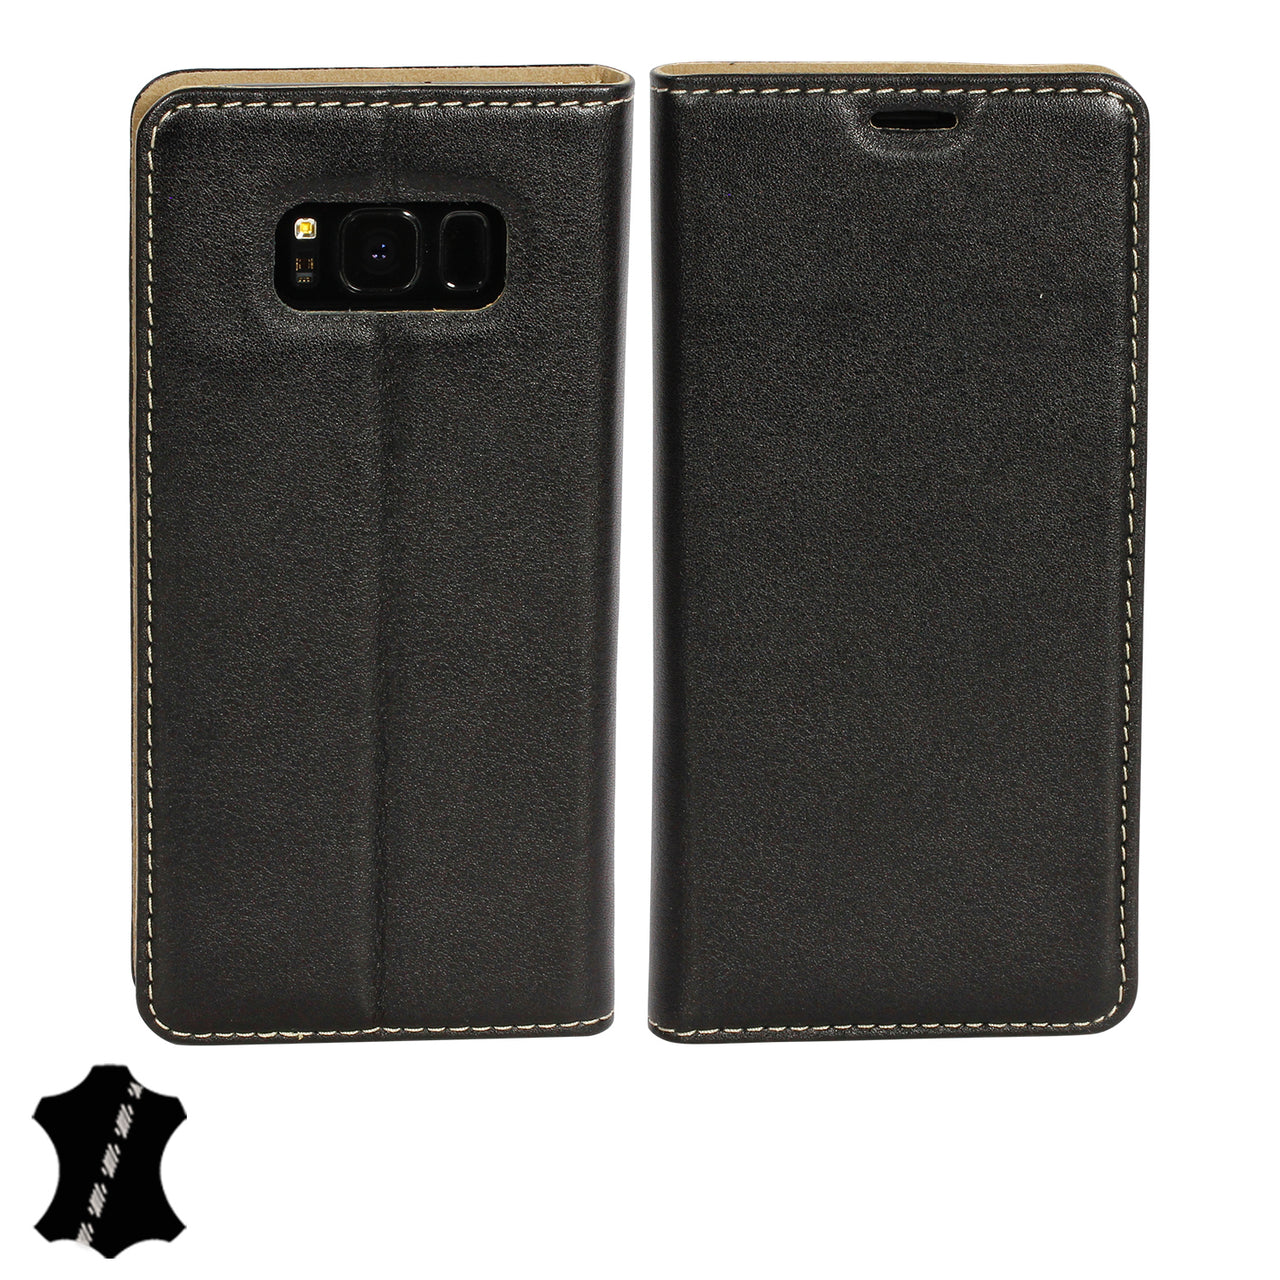 Samsung Galaxy S8 Plus (S8+) Genuine Leather Case with Stand | Artisancover